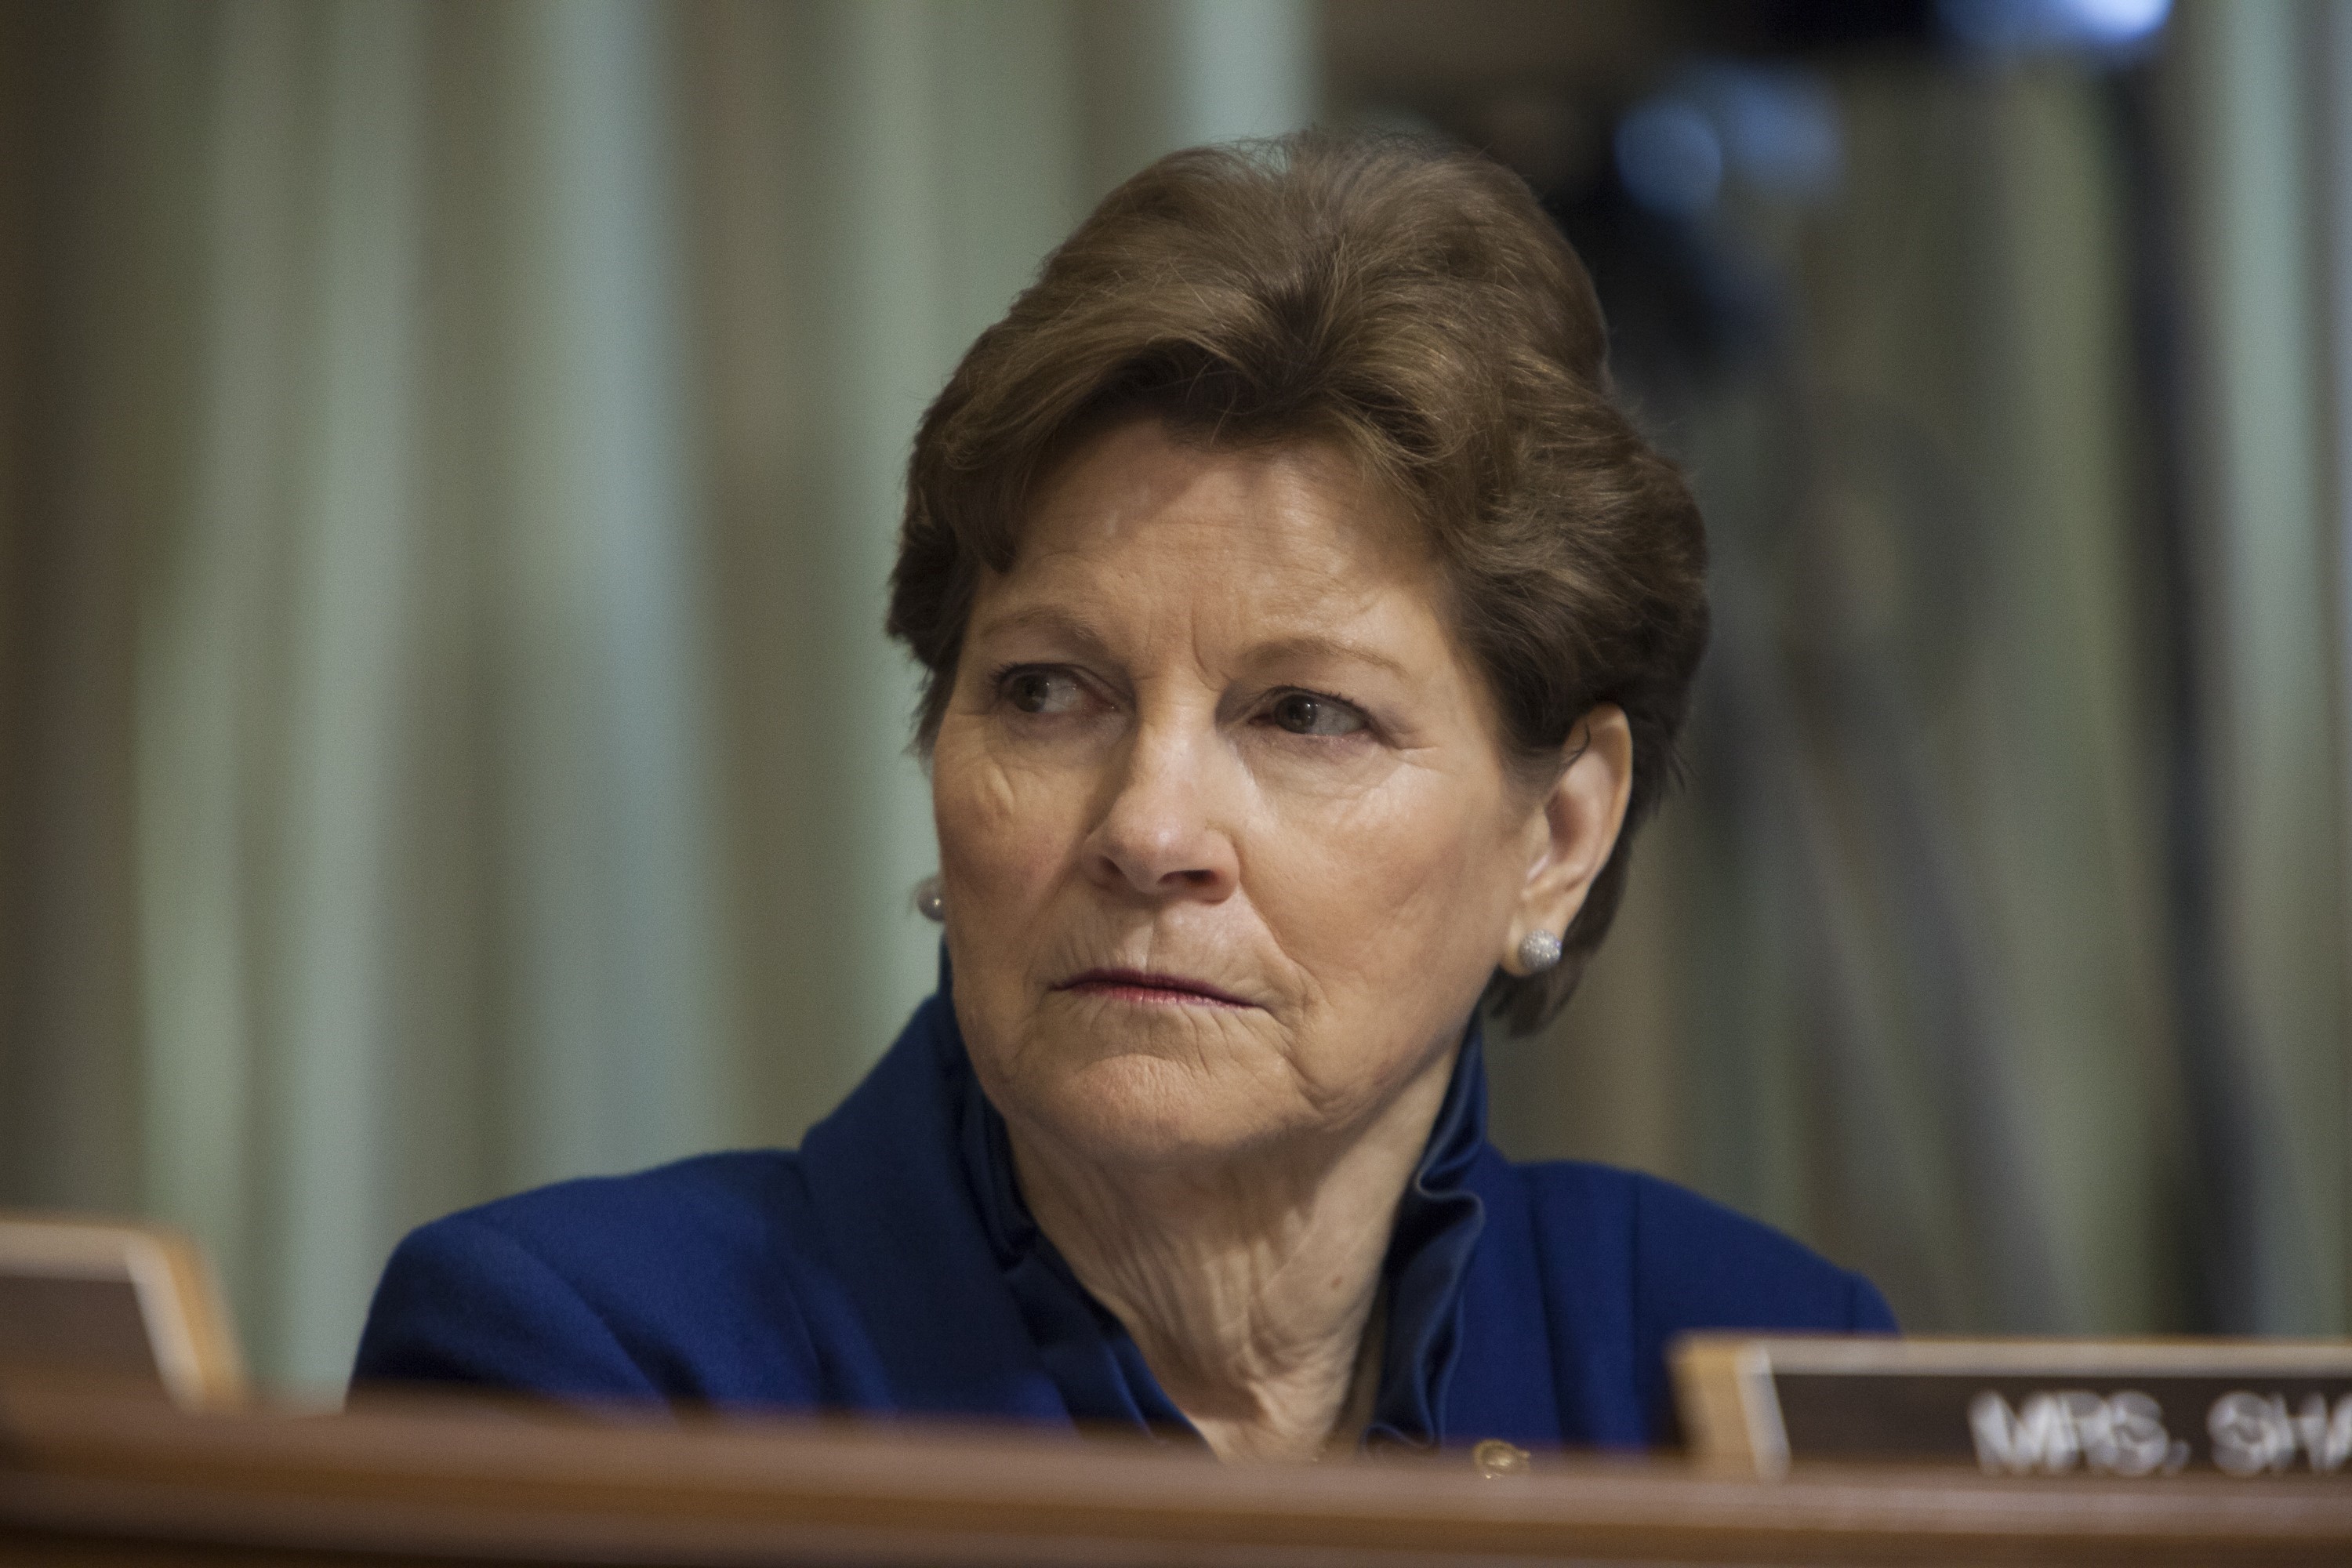 Senator Jeanne Shaheen listens to opening remarks during a Senate Foreign Relations Committee hearing on U.S. Policy In Ukraine in Washington, D.C., USA on March 10, 2015. (Anadolu Agency—Getty Images)